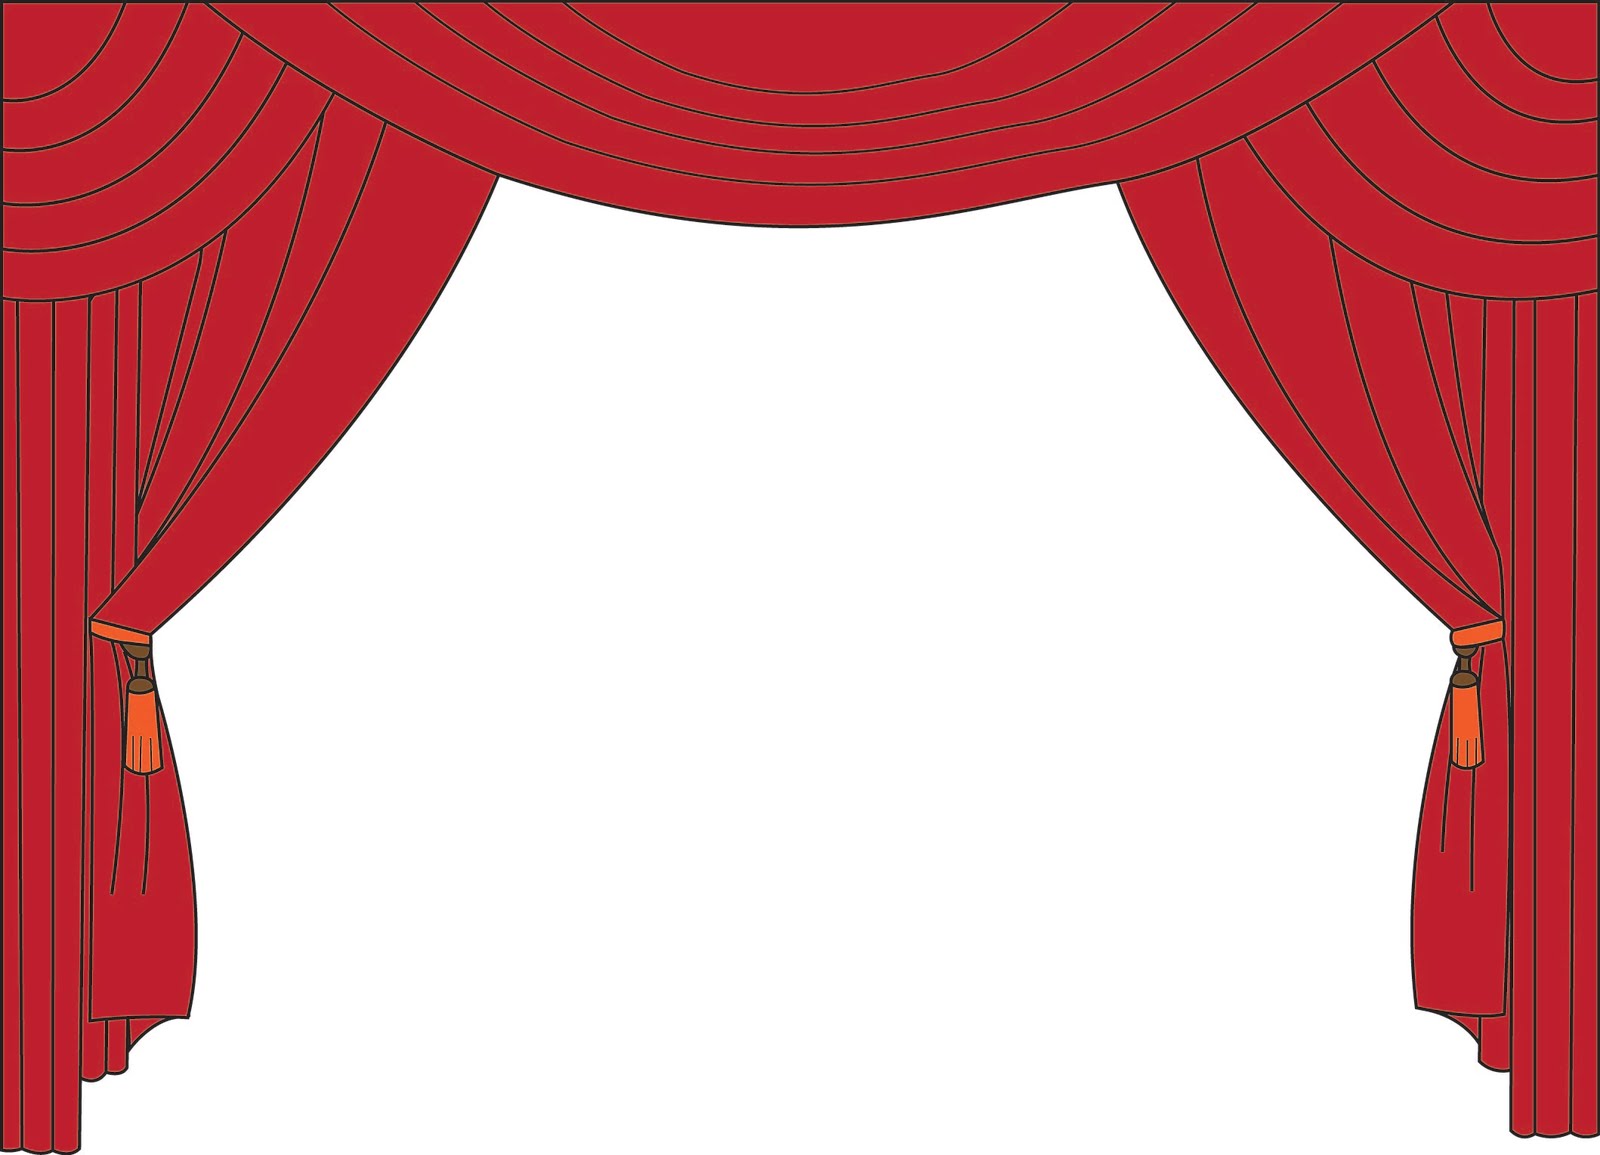 Curtain 20clipart | Clipart Panda - Free Clipart Images